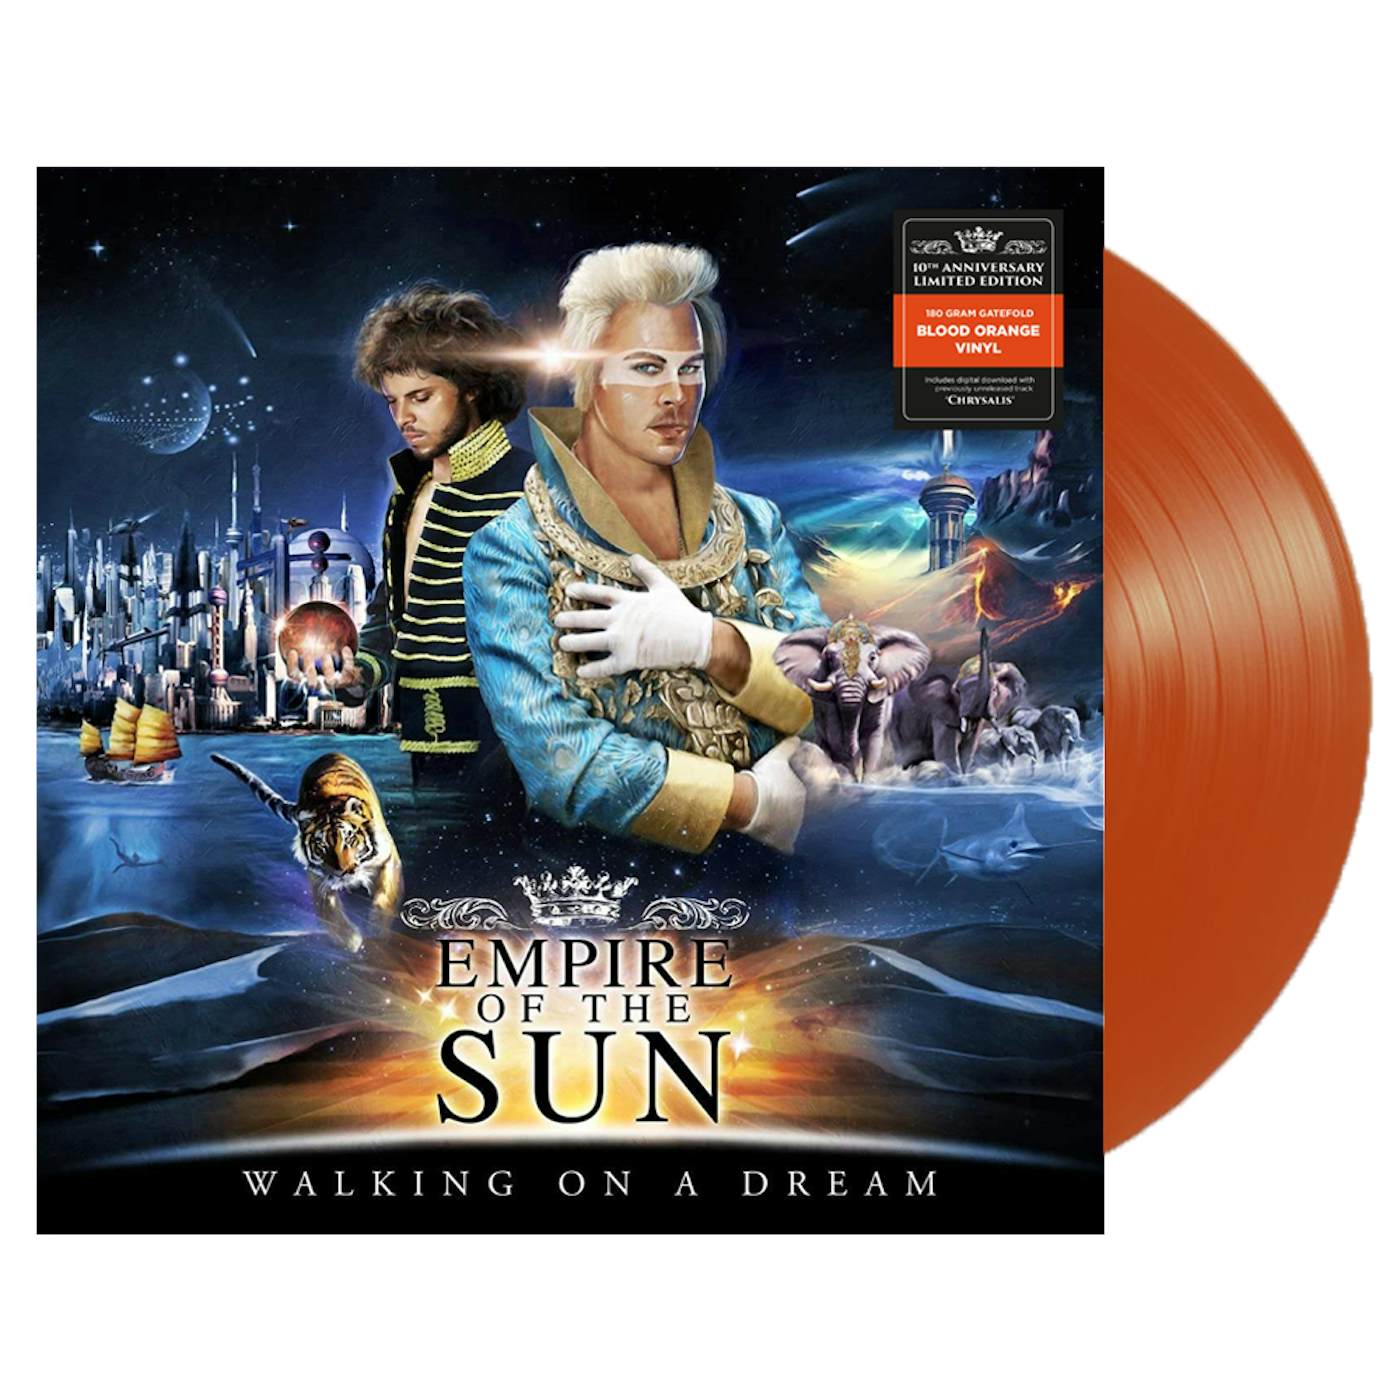 Empire of the Sun Walking On A Dream 10th Anniversary Limited Edition Vinyl